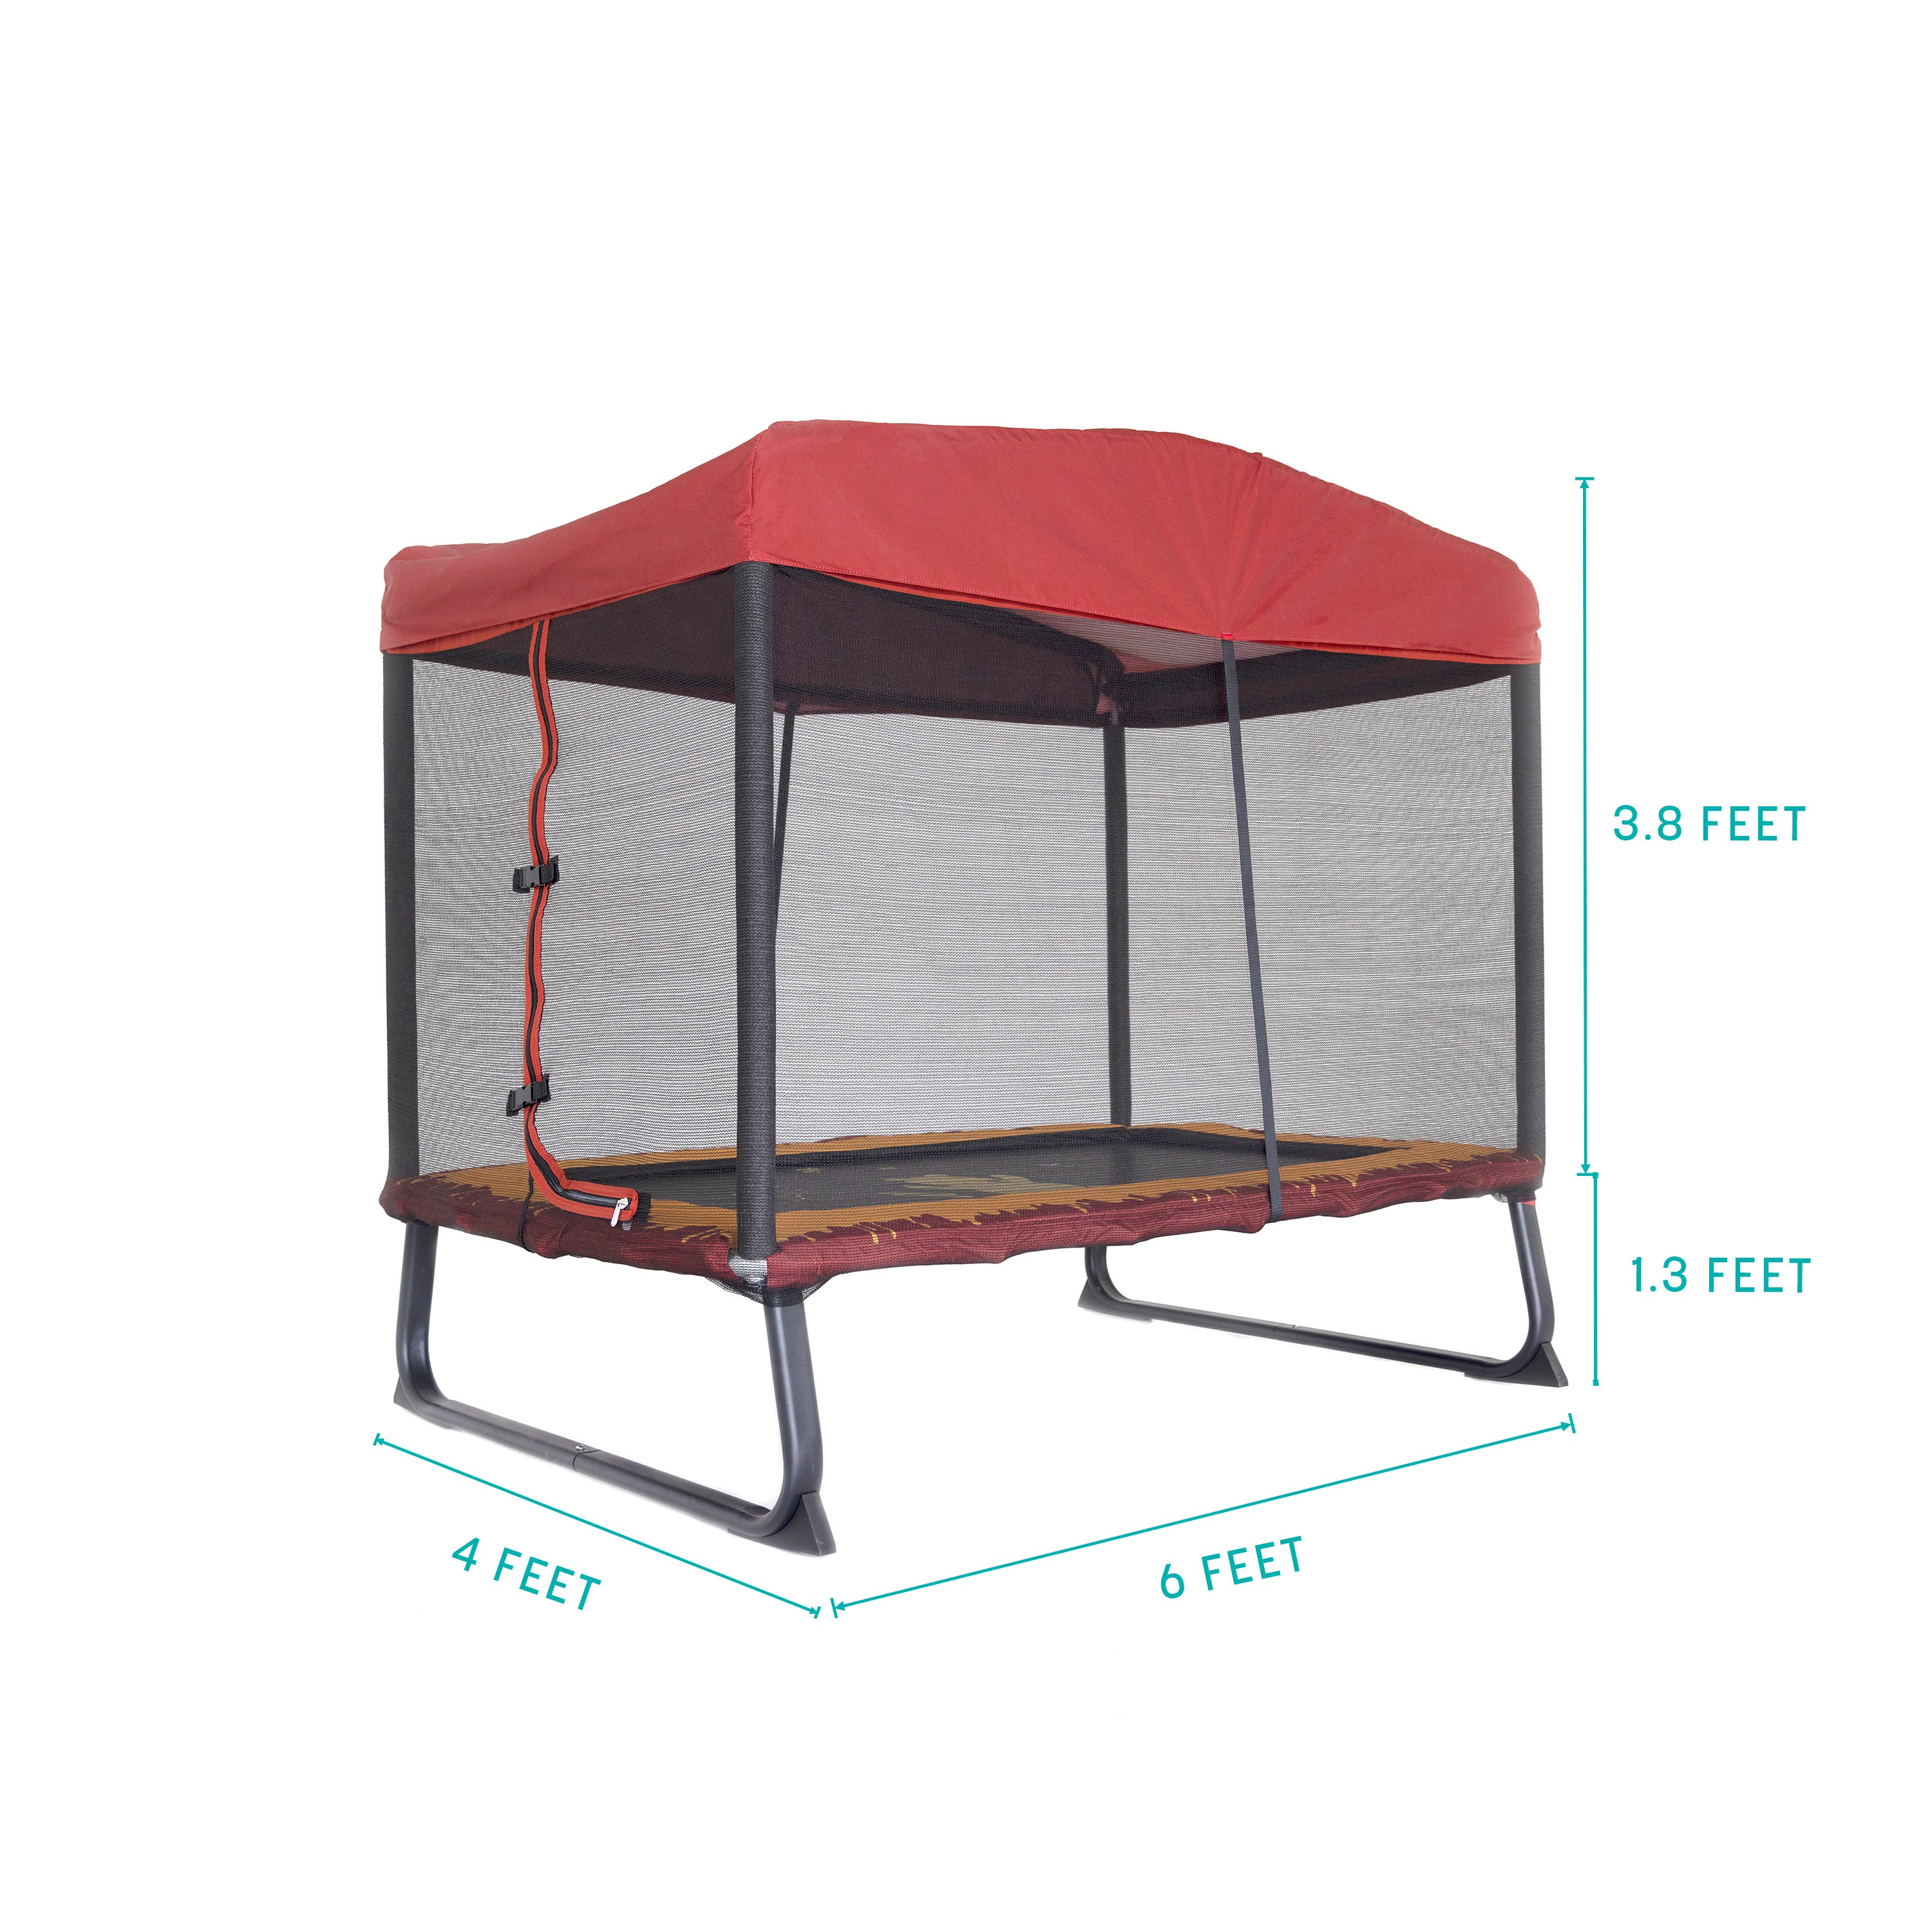 The rectangle trampoline is 4 feet wide, 6 feet long, 1.3 feet from ground to frame, and 3.8 feet from frame to top of canopy. 